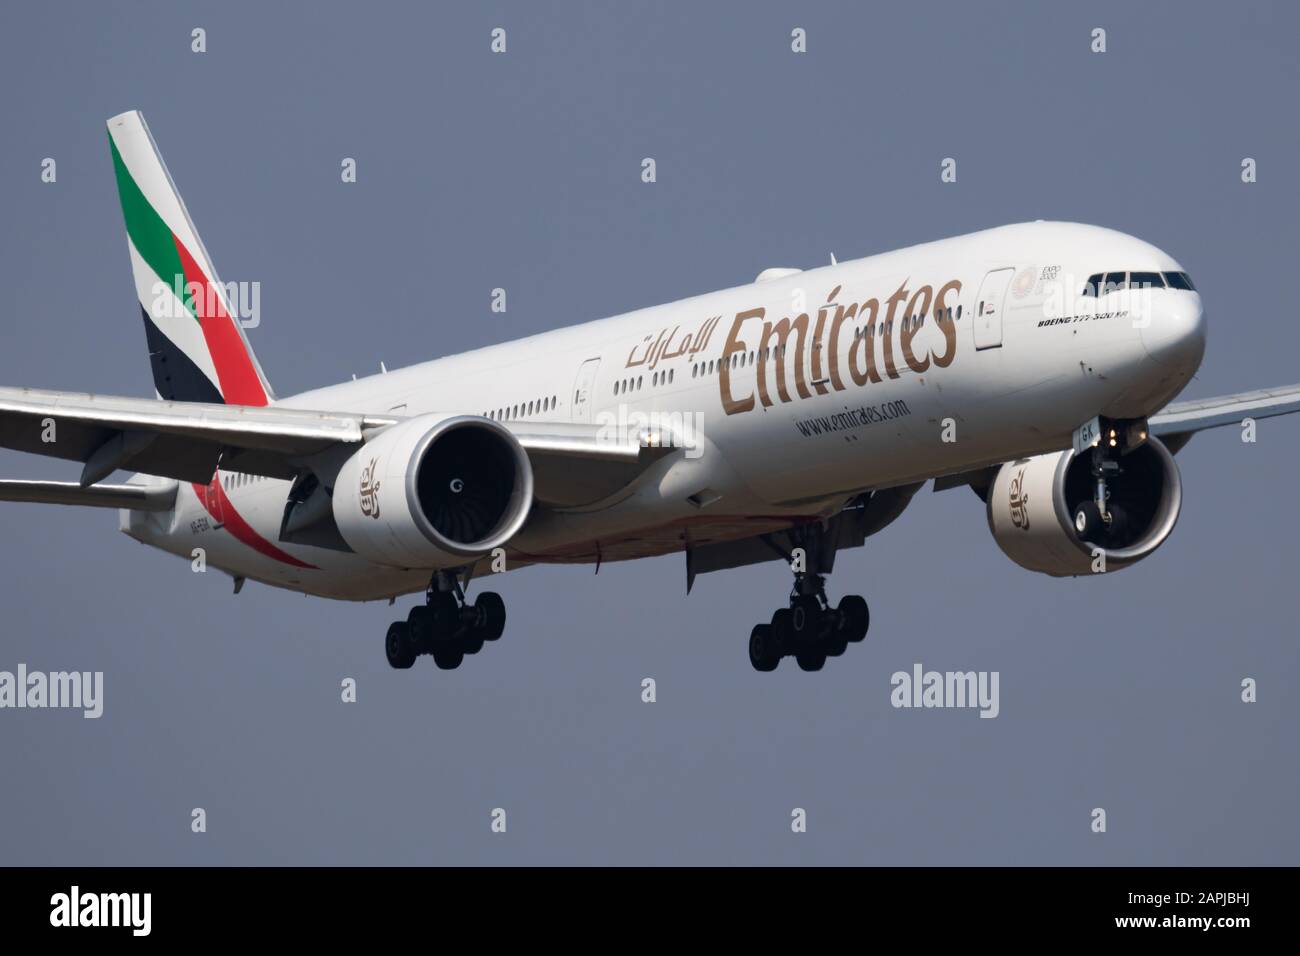 Budapest / Hungary - April 8, 2019: Emirates Airlines Boeing 777-300ER A6-EGK passenger plane arrival and landing at Budapest Airport Stock Photo